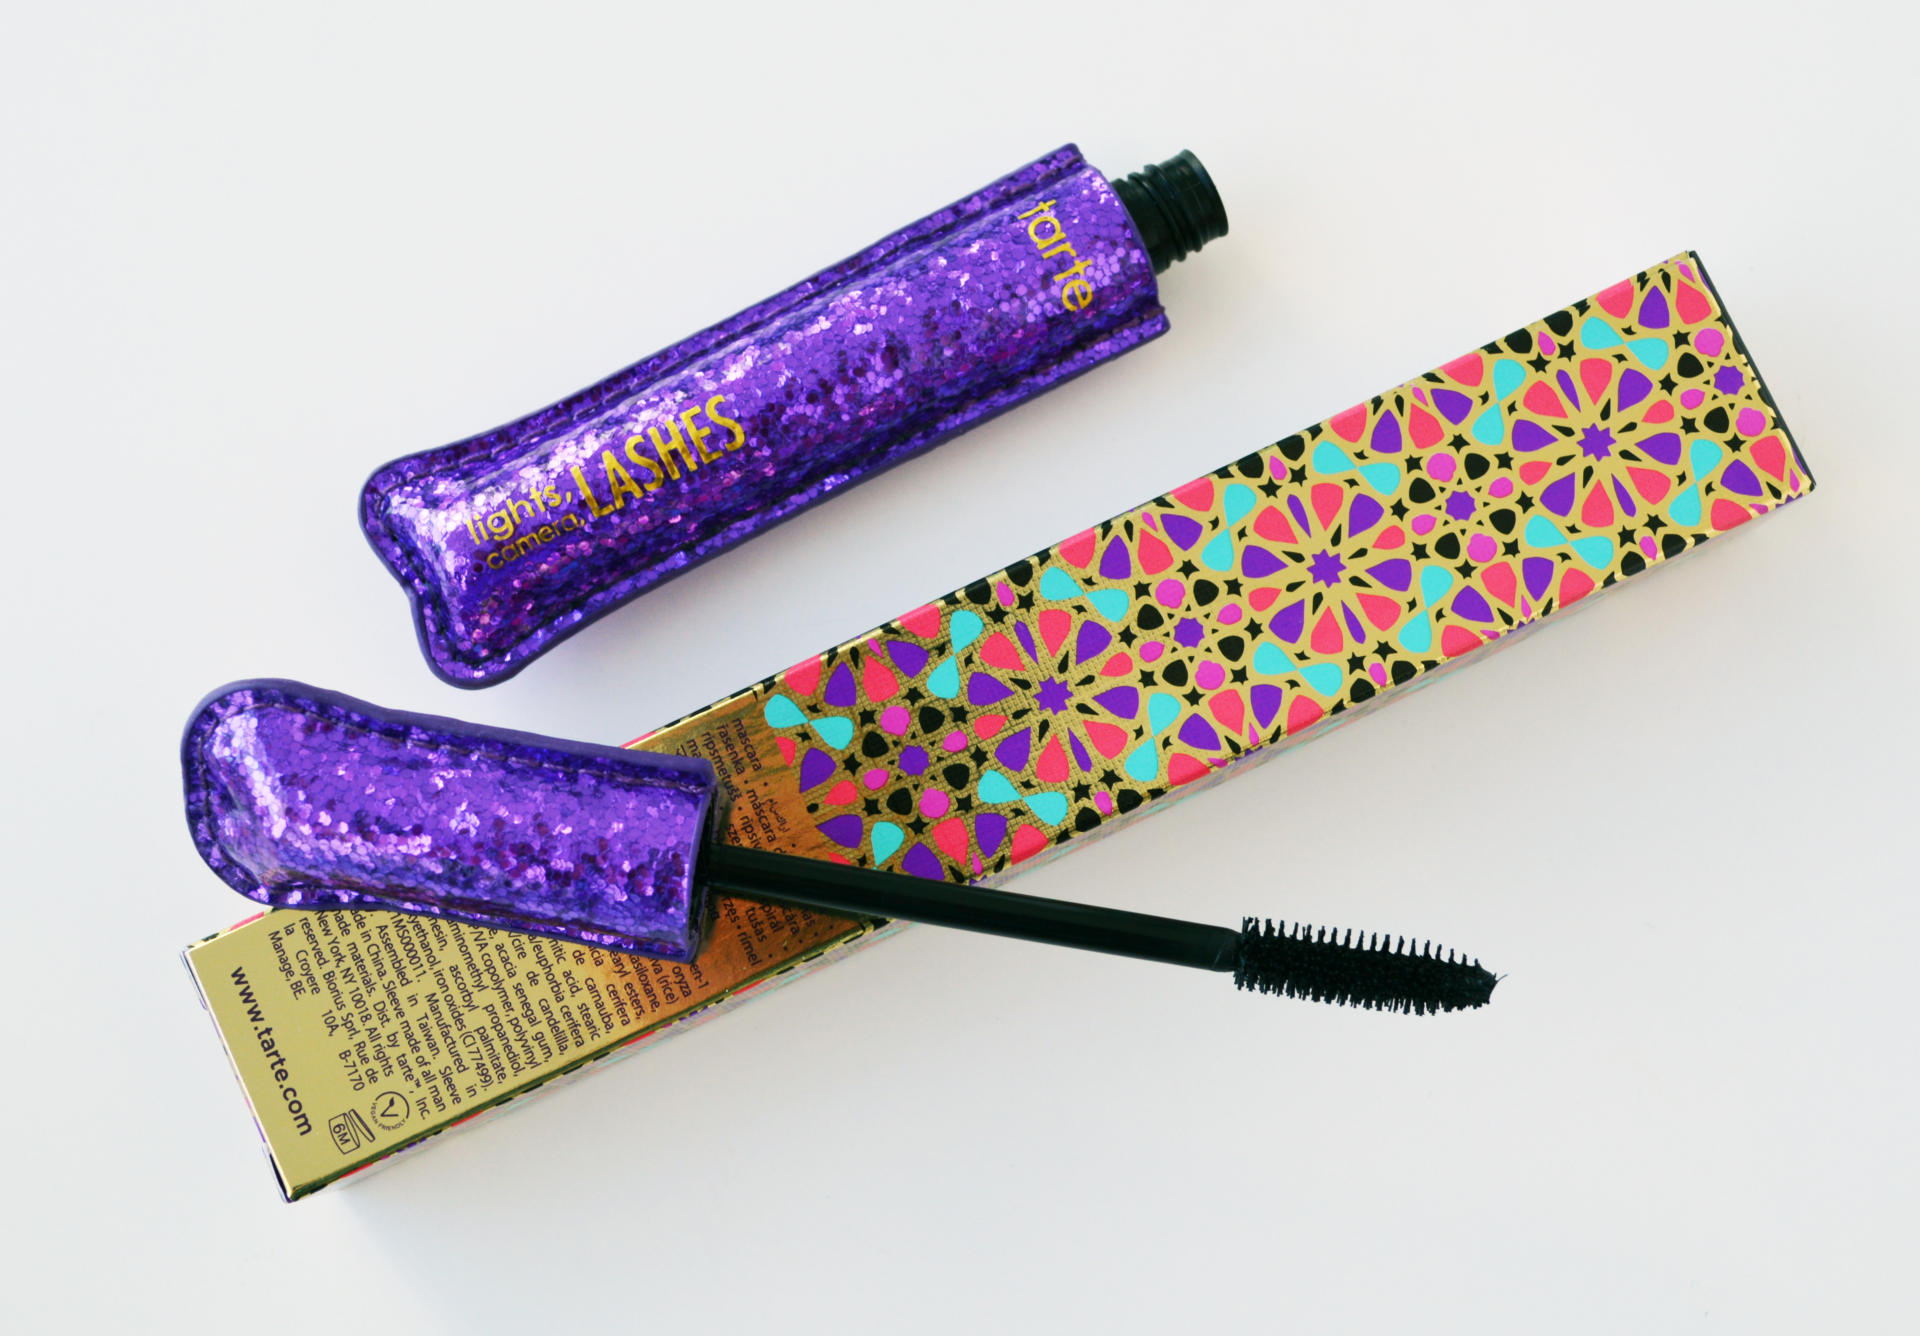 Tarte Limited-Edition Lights, Camera, Lashes 4-in-1 Mascara